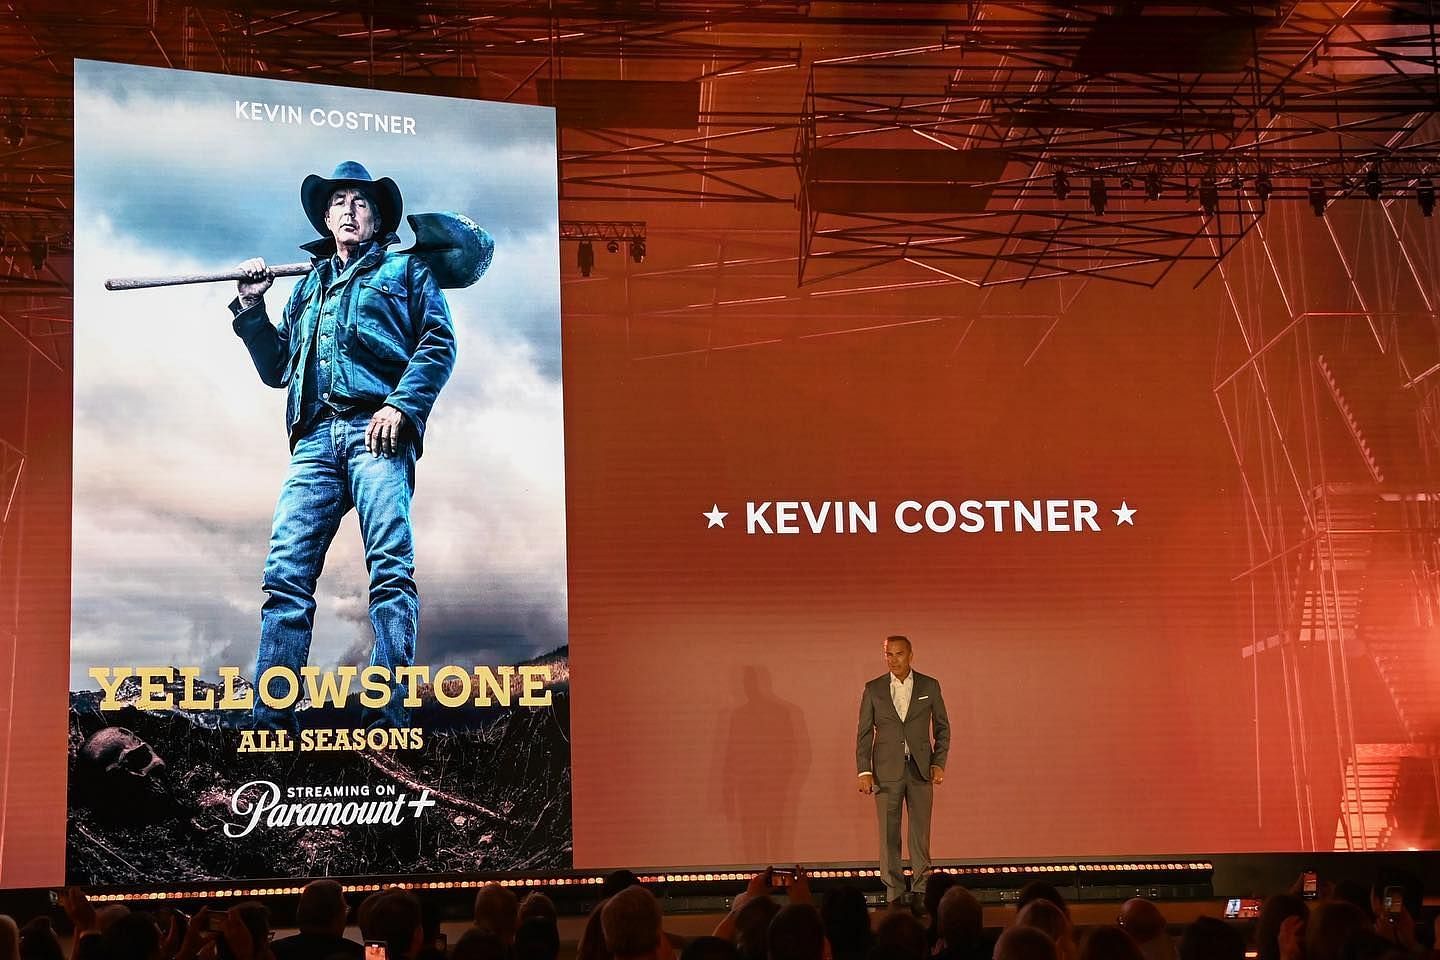 How tall is Kevin Costner?